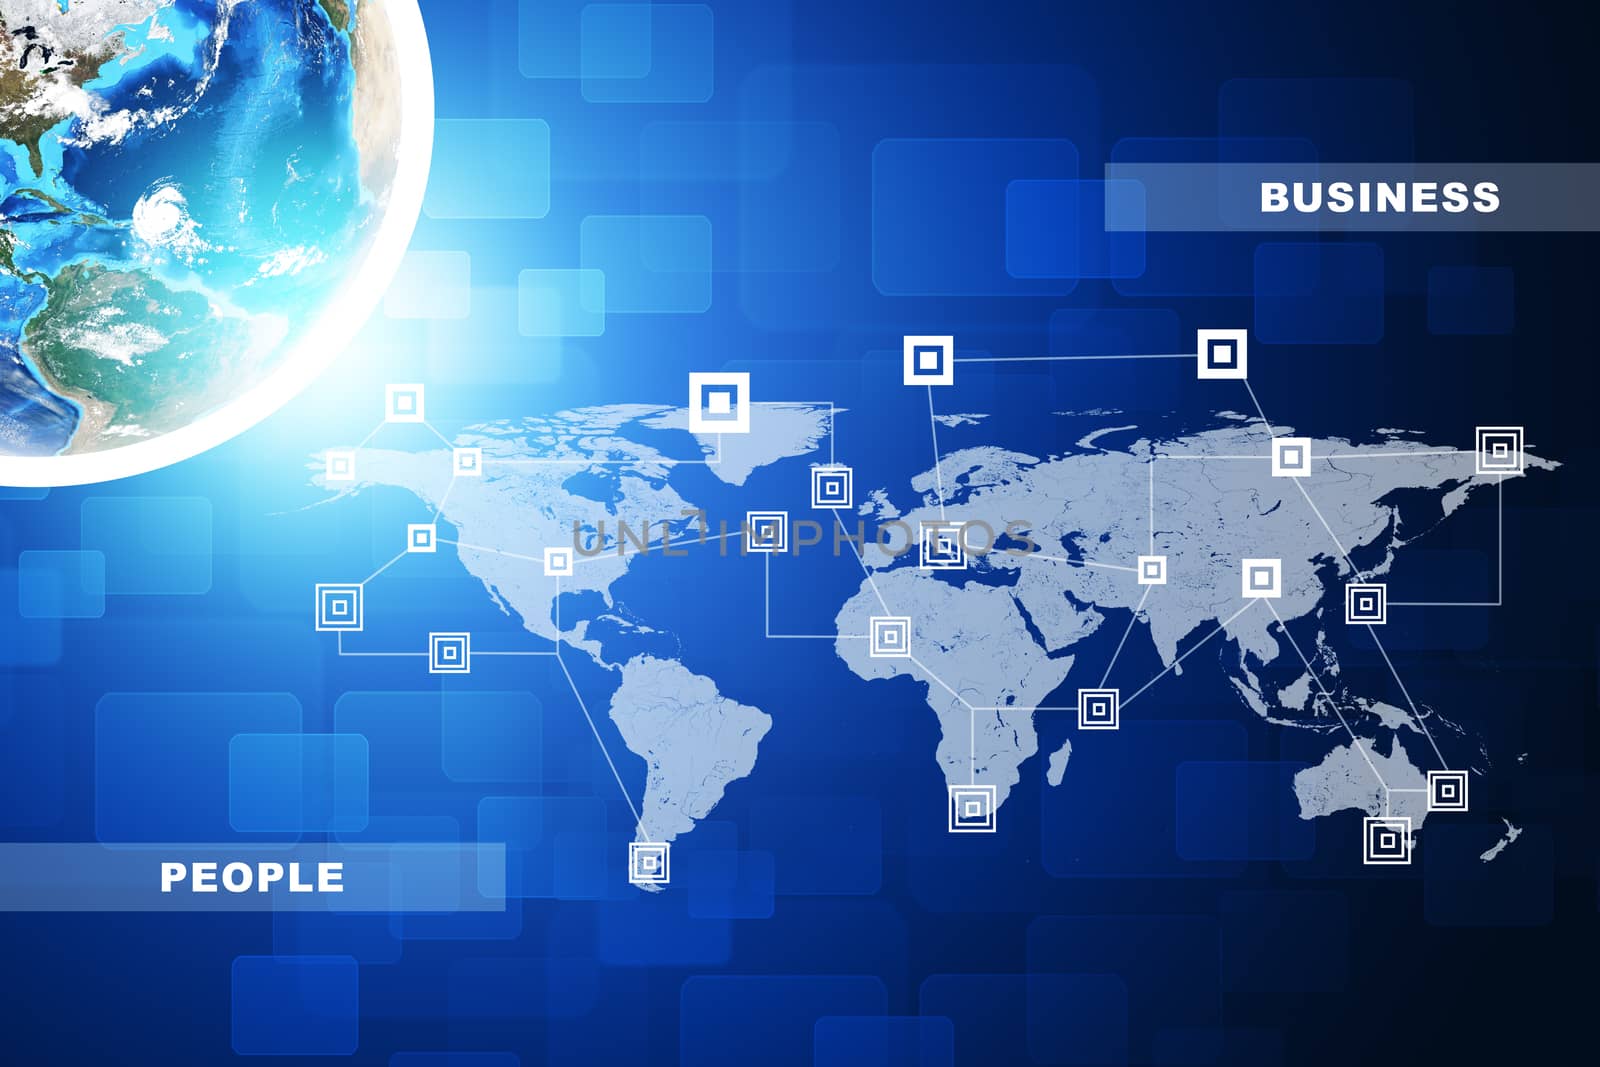 Earth with business words on abstract blue background with world map. Elements of this image furnished by NASA